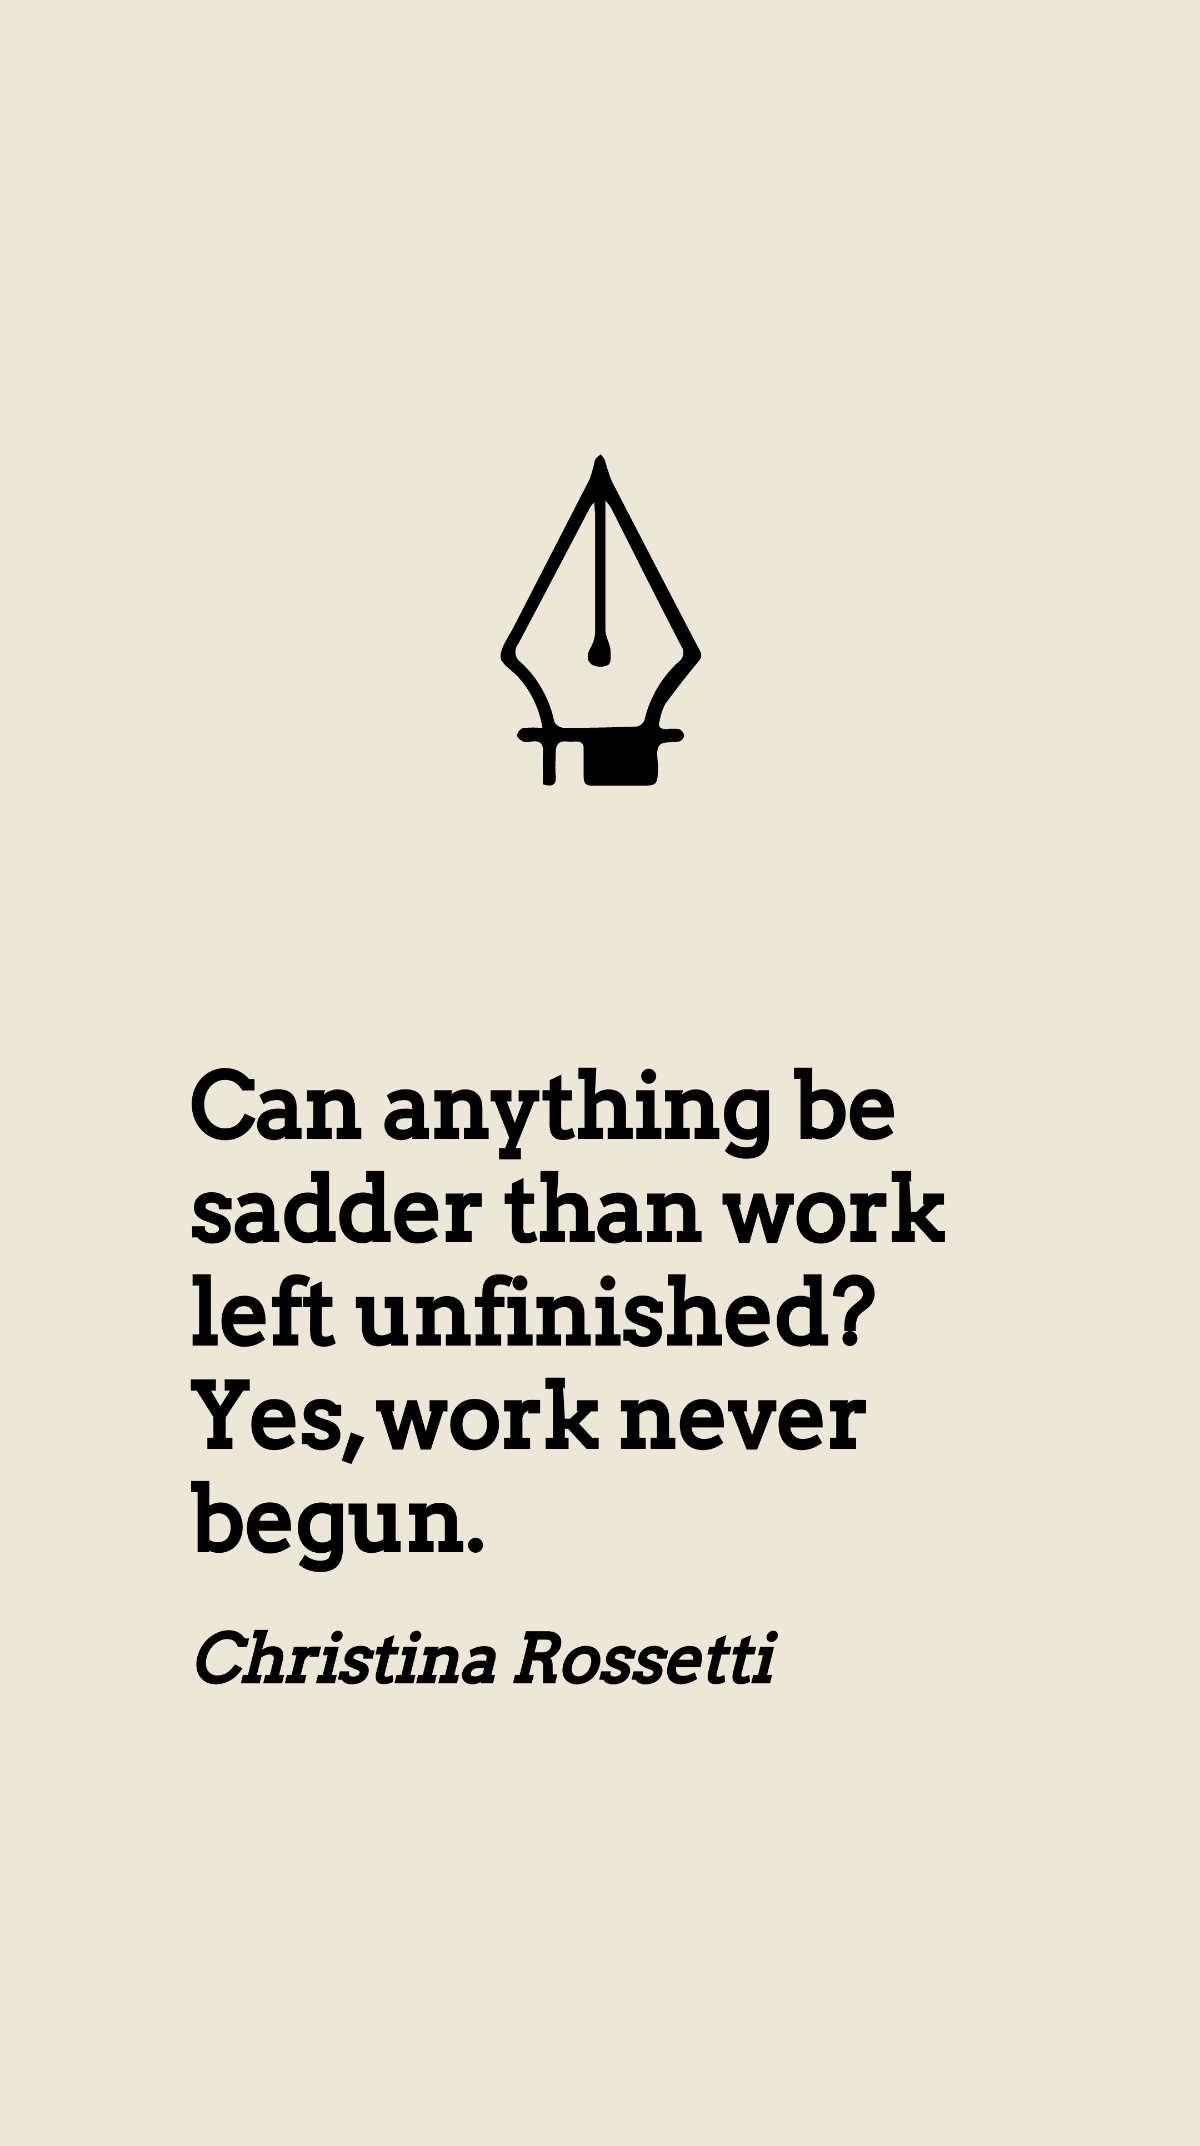 Christina Rossetti - Can anything be sadder than work left unfinished? Yes, work never begun. Template